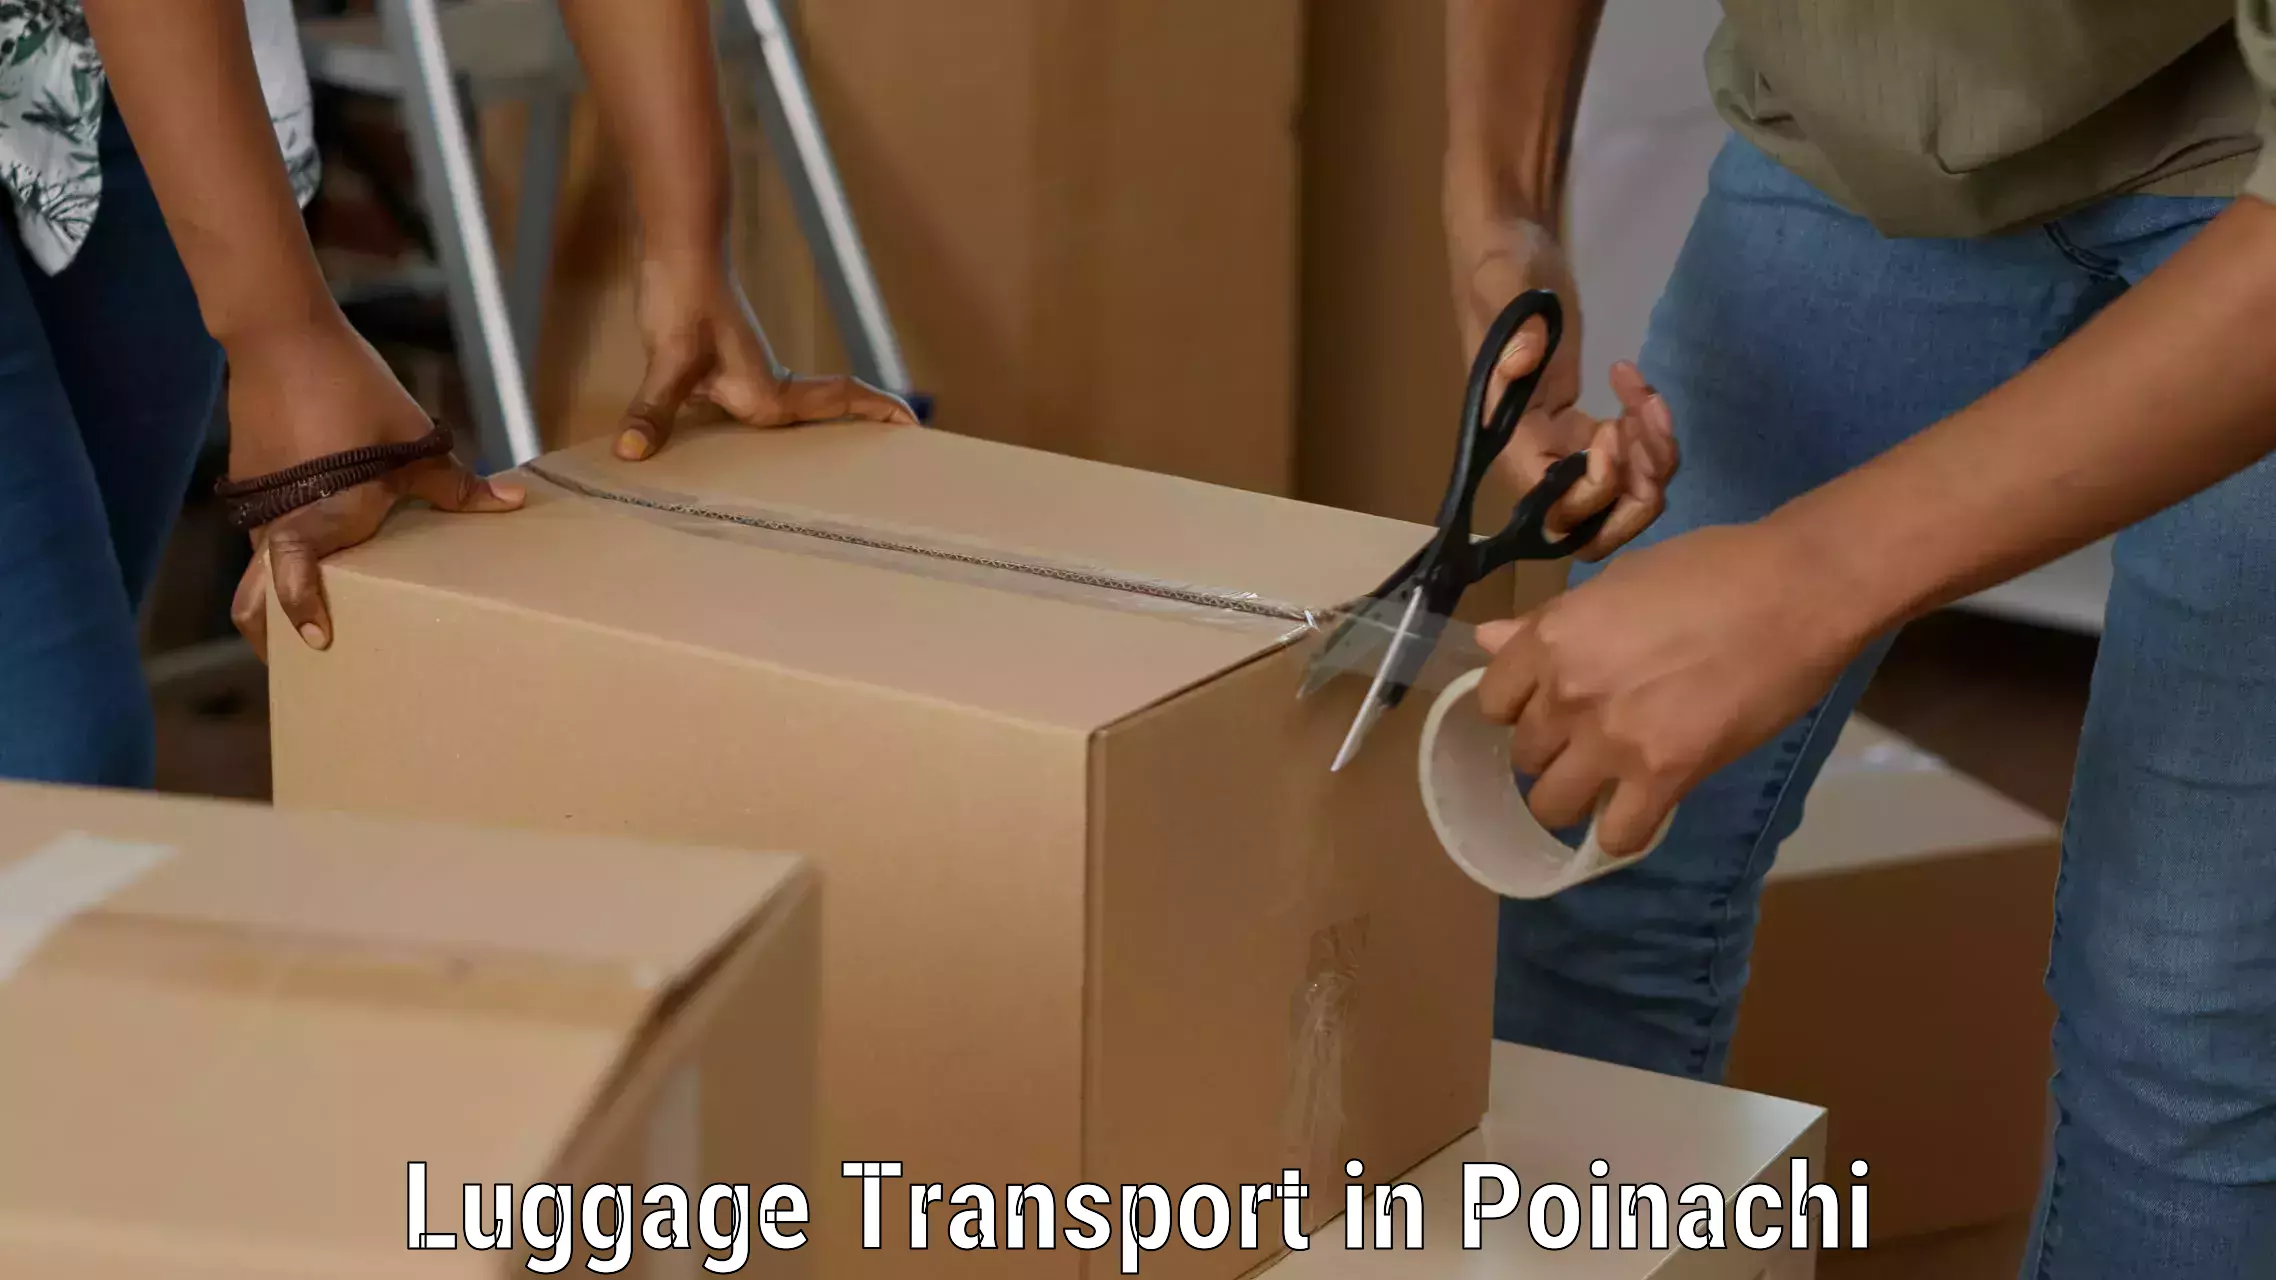 Fast track baggage delivery in Poinachi